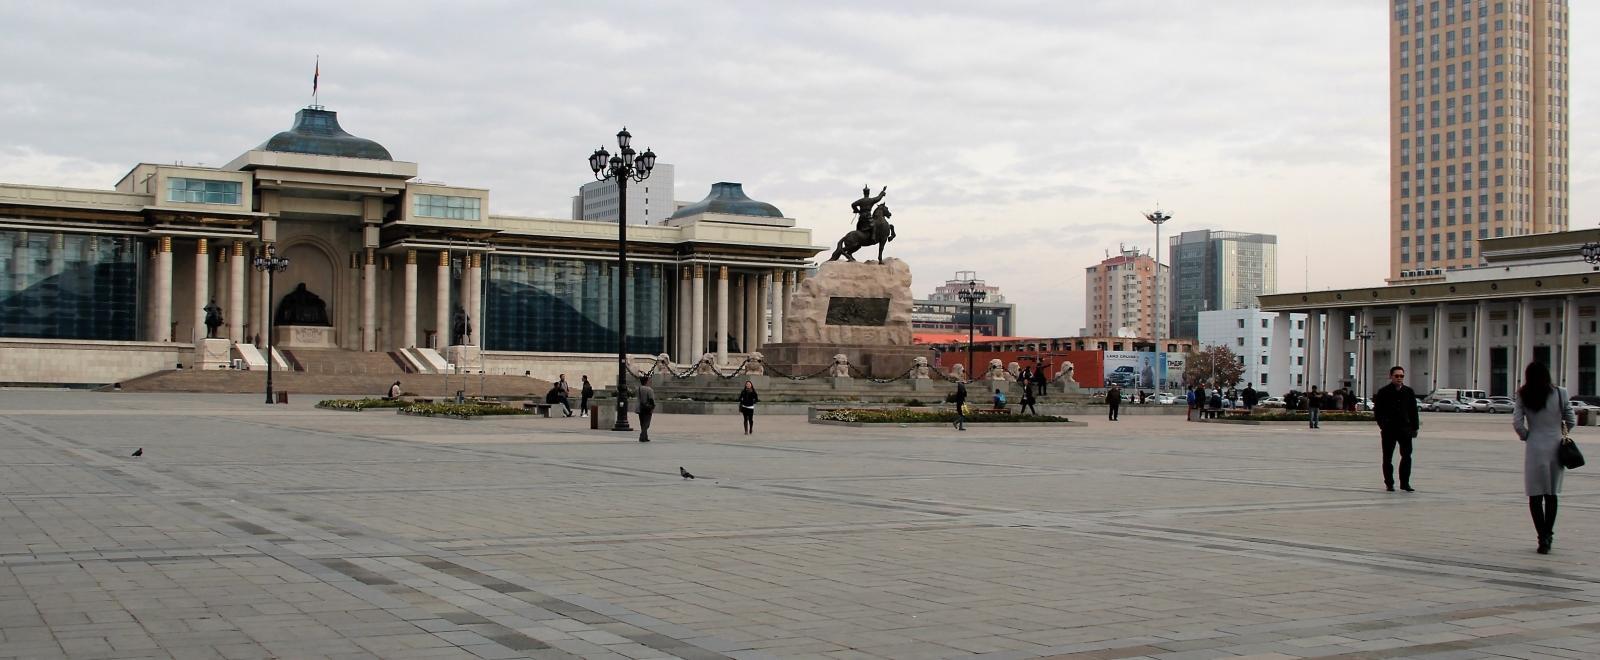 Parliament at Sukhbaatar Square, a site to visit during a Law internship in Mongolia.